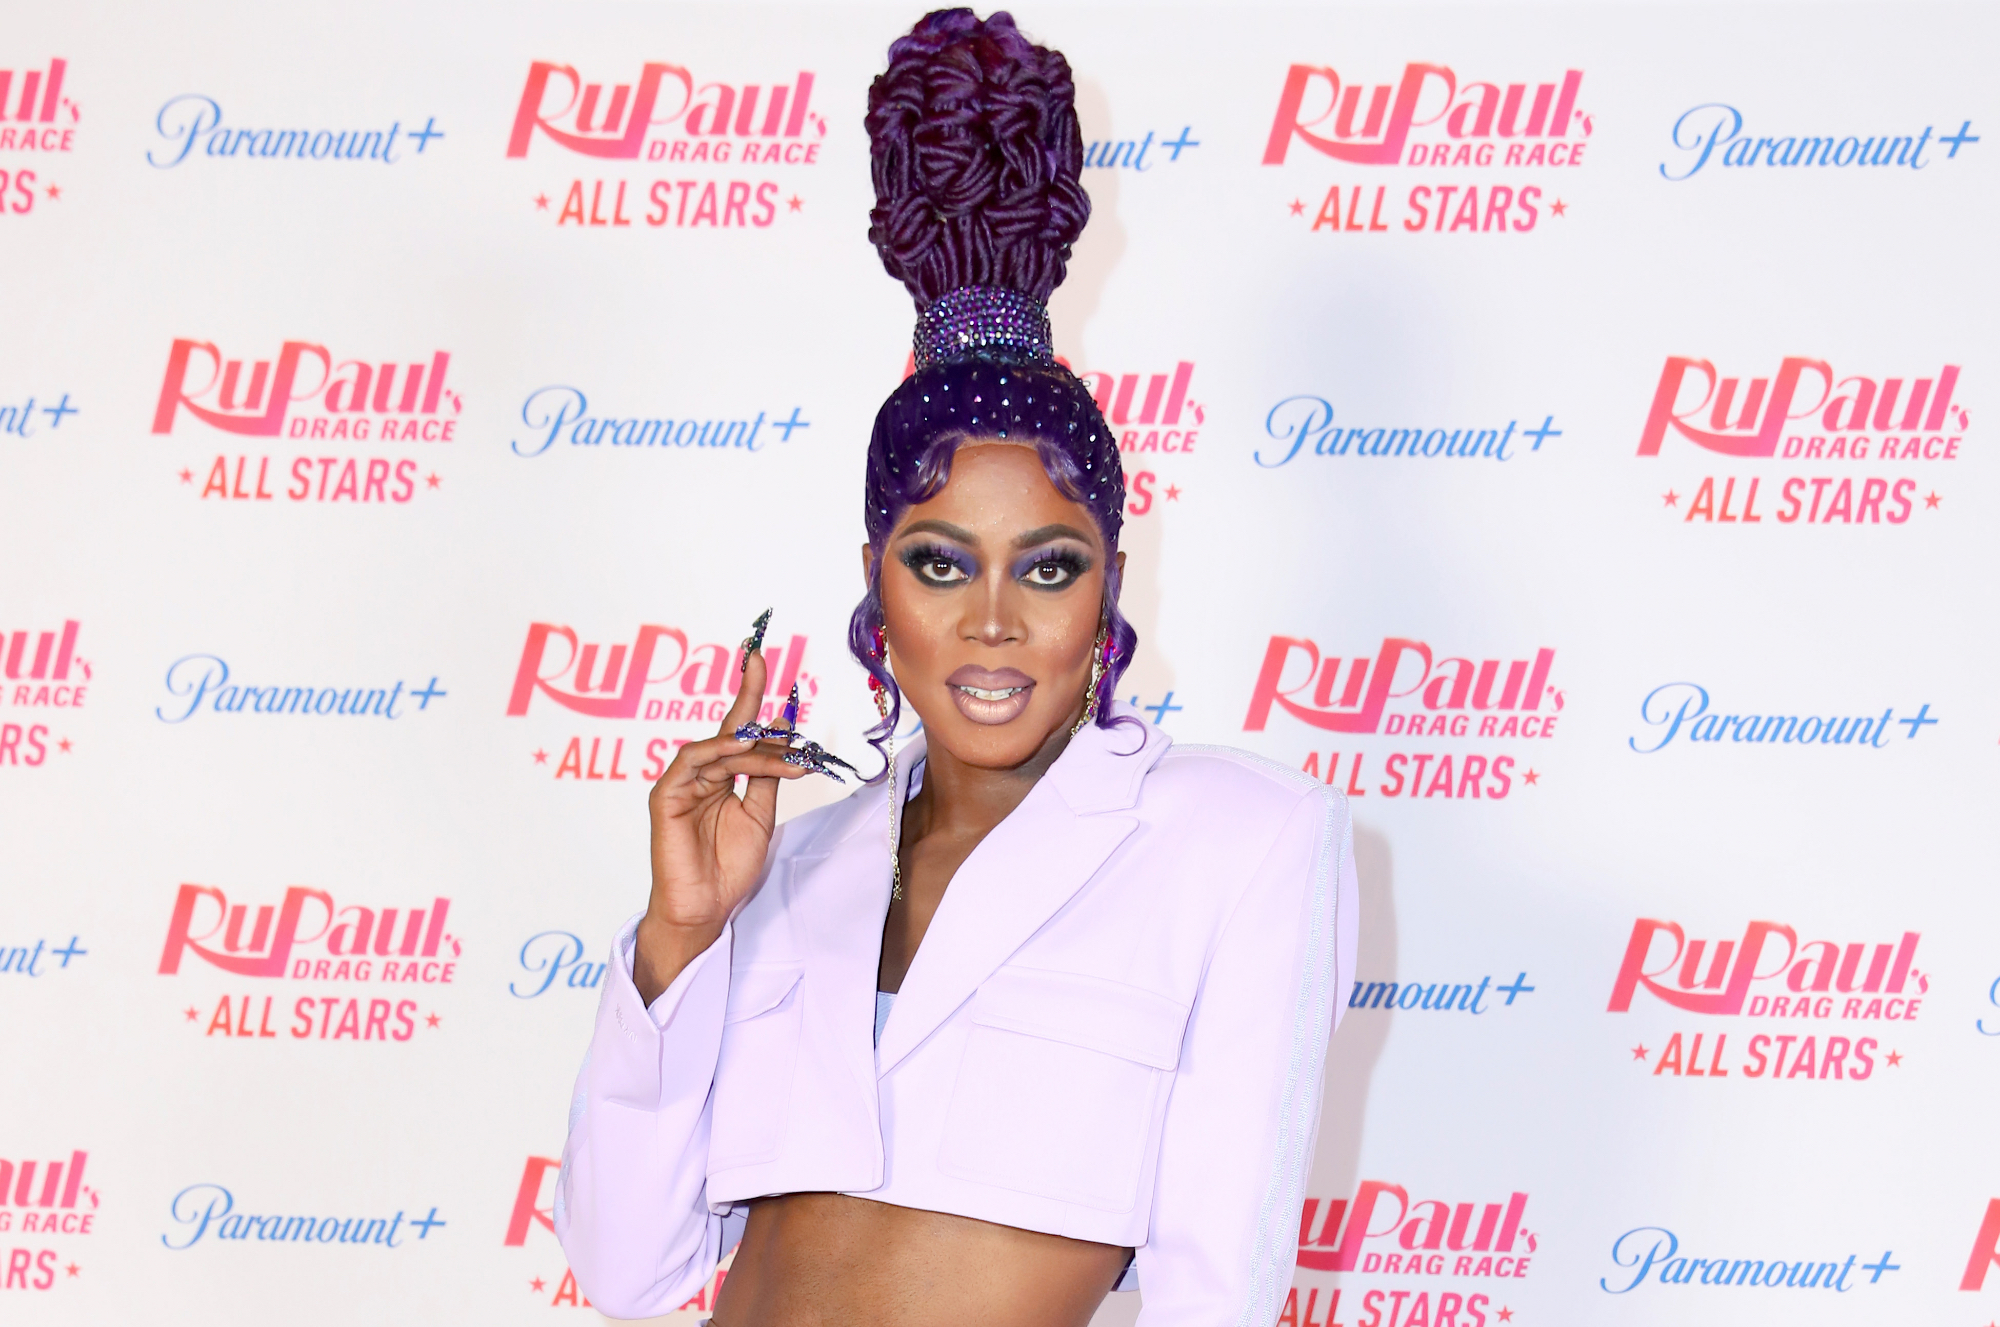 'RuPaul's Drag Race All Stars 6' queen Ra'Jah O'Hara at the finale